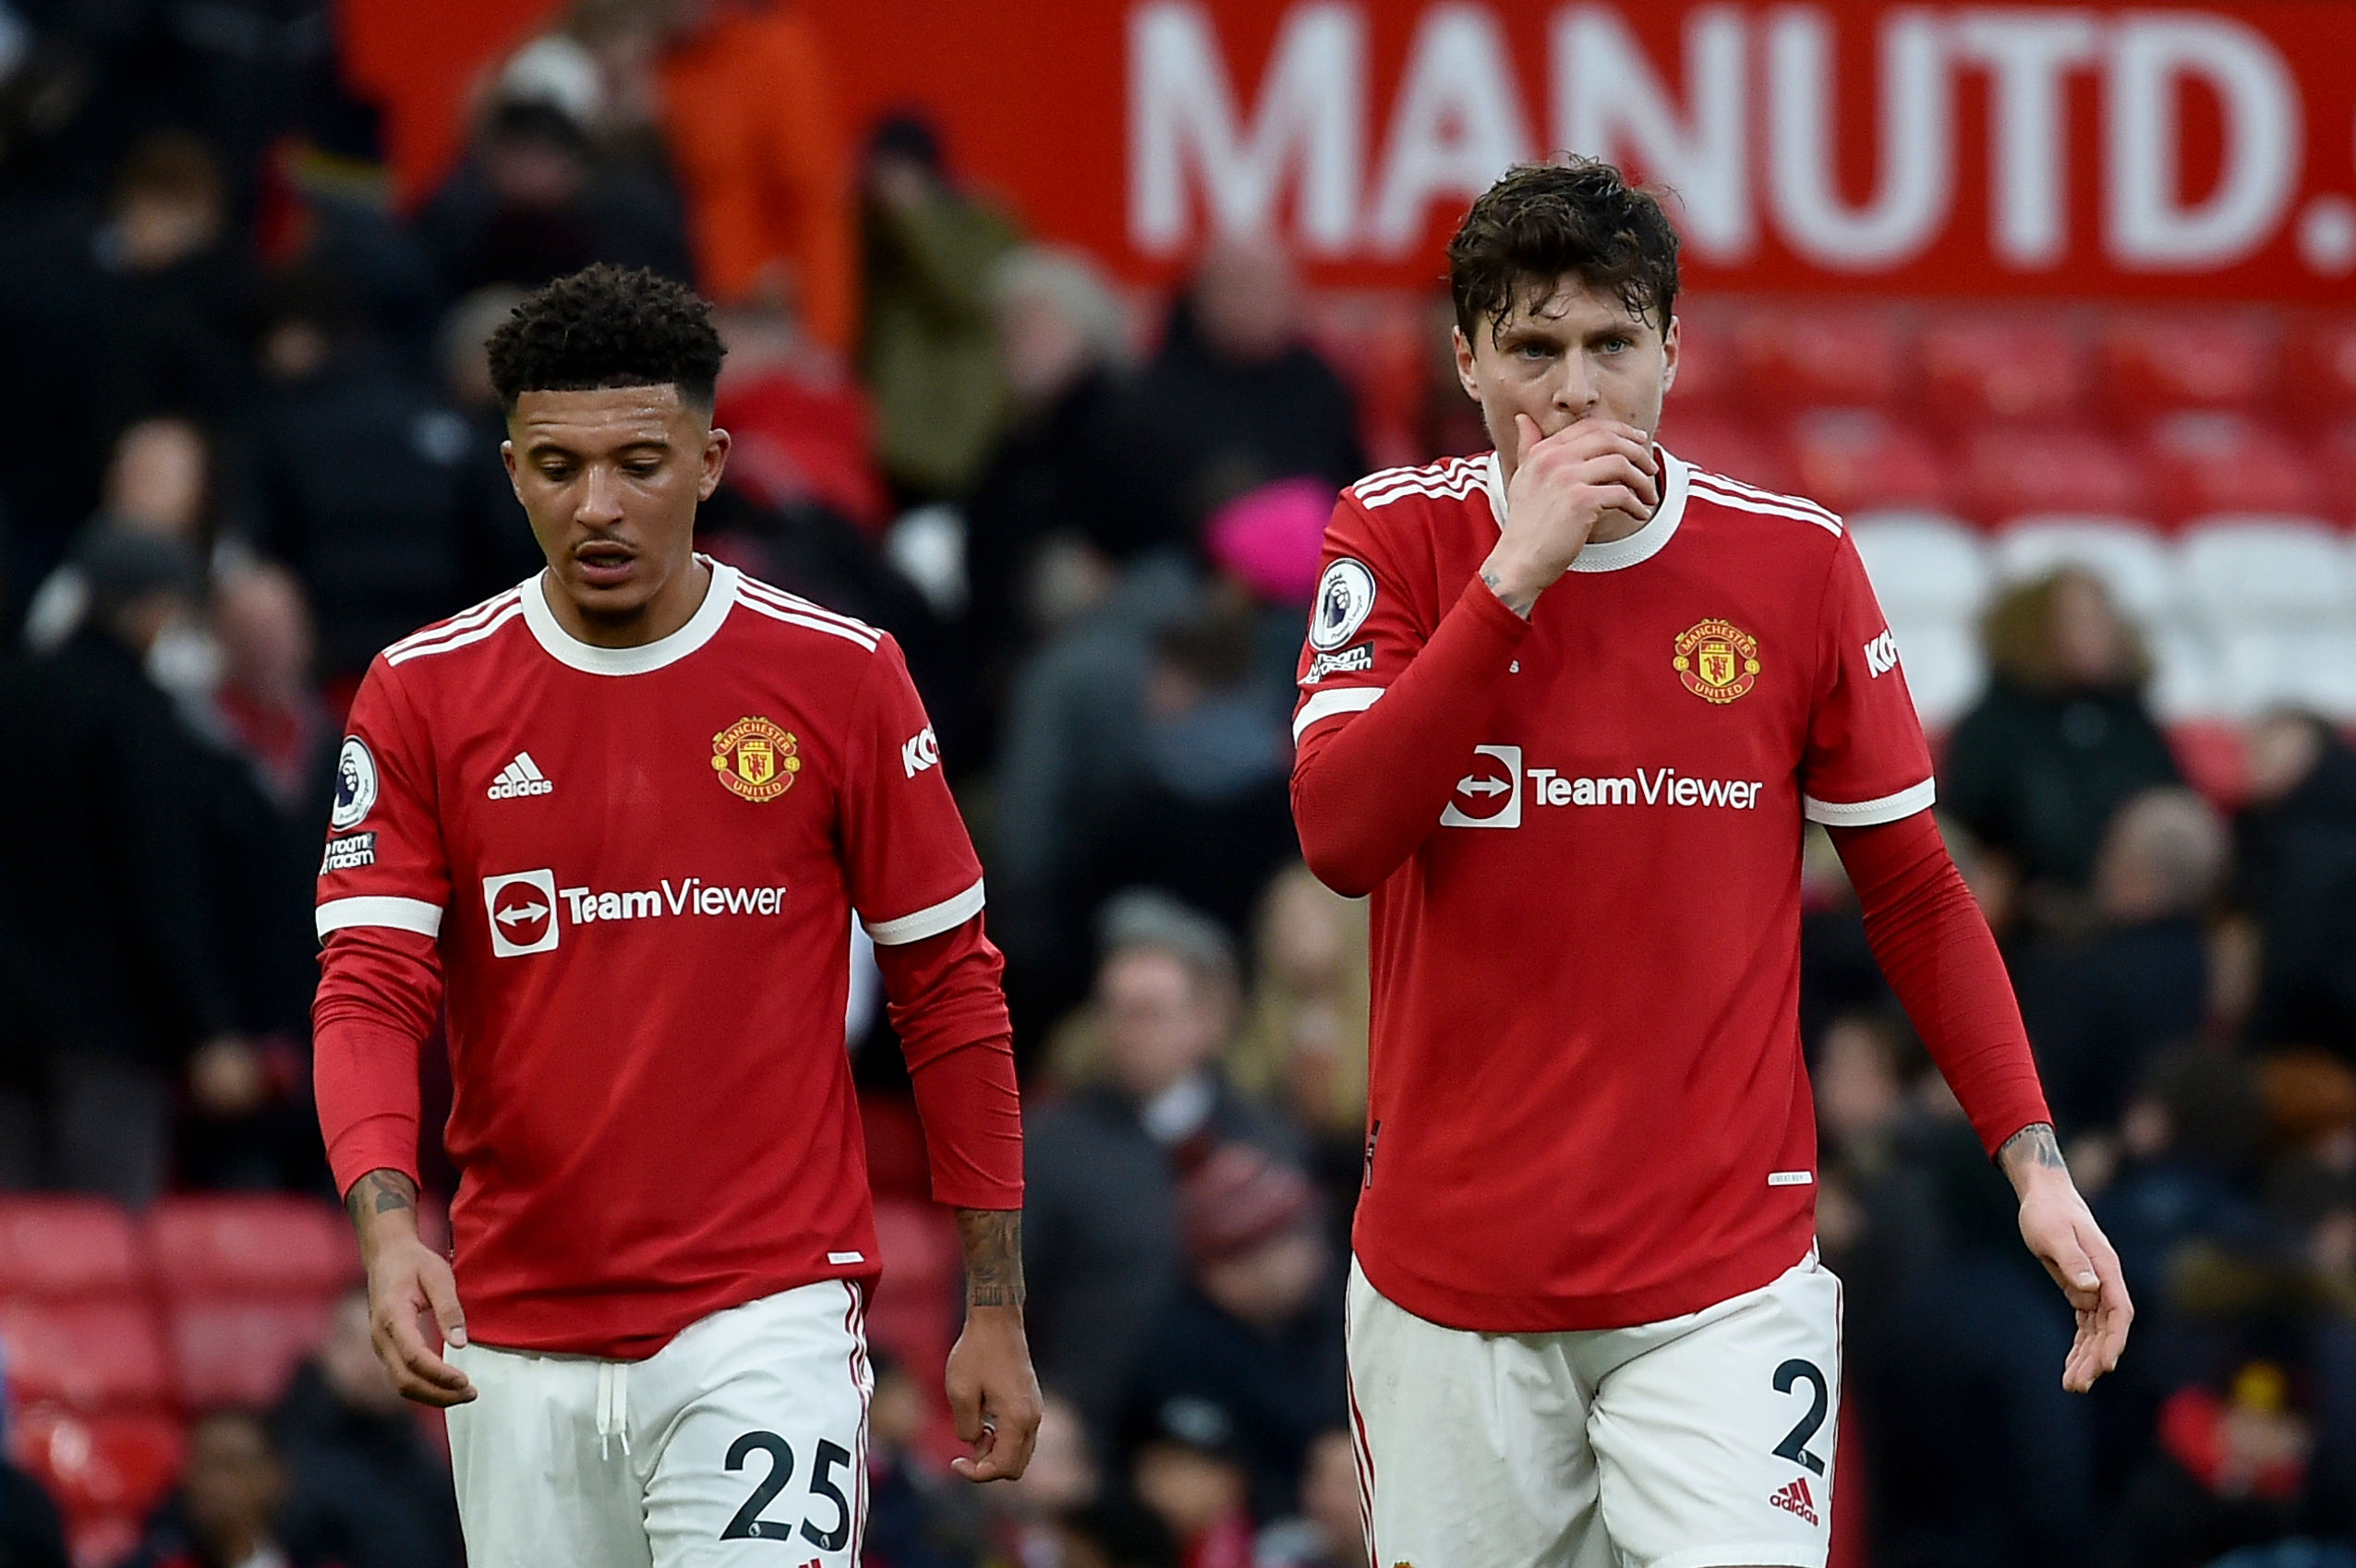 Concerned Manchester United players want clarity over manager situation